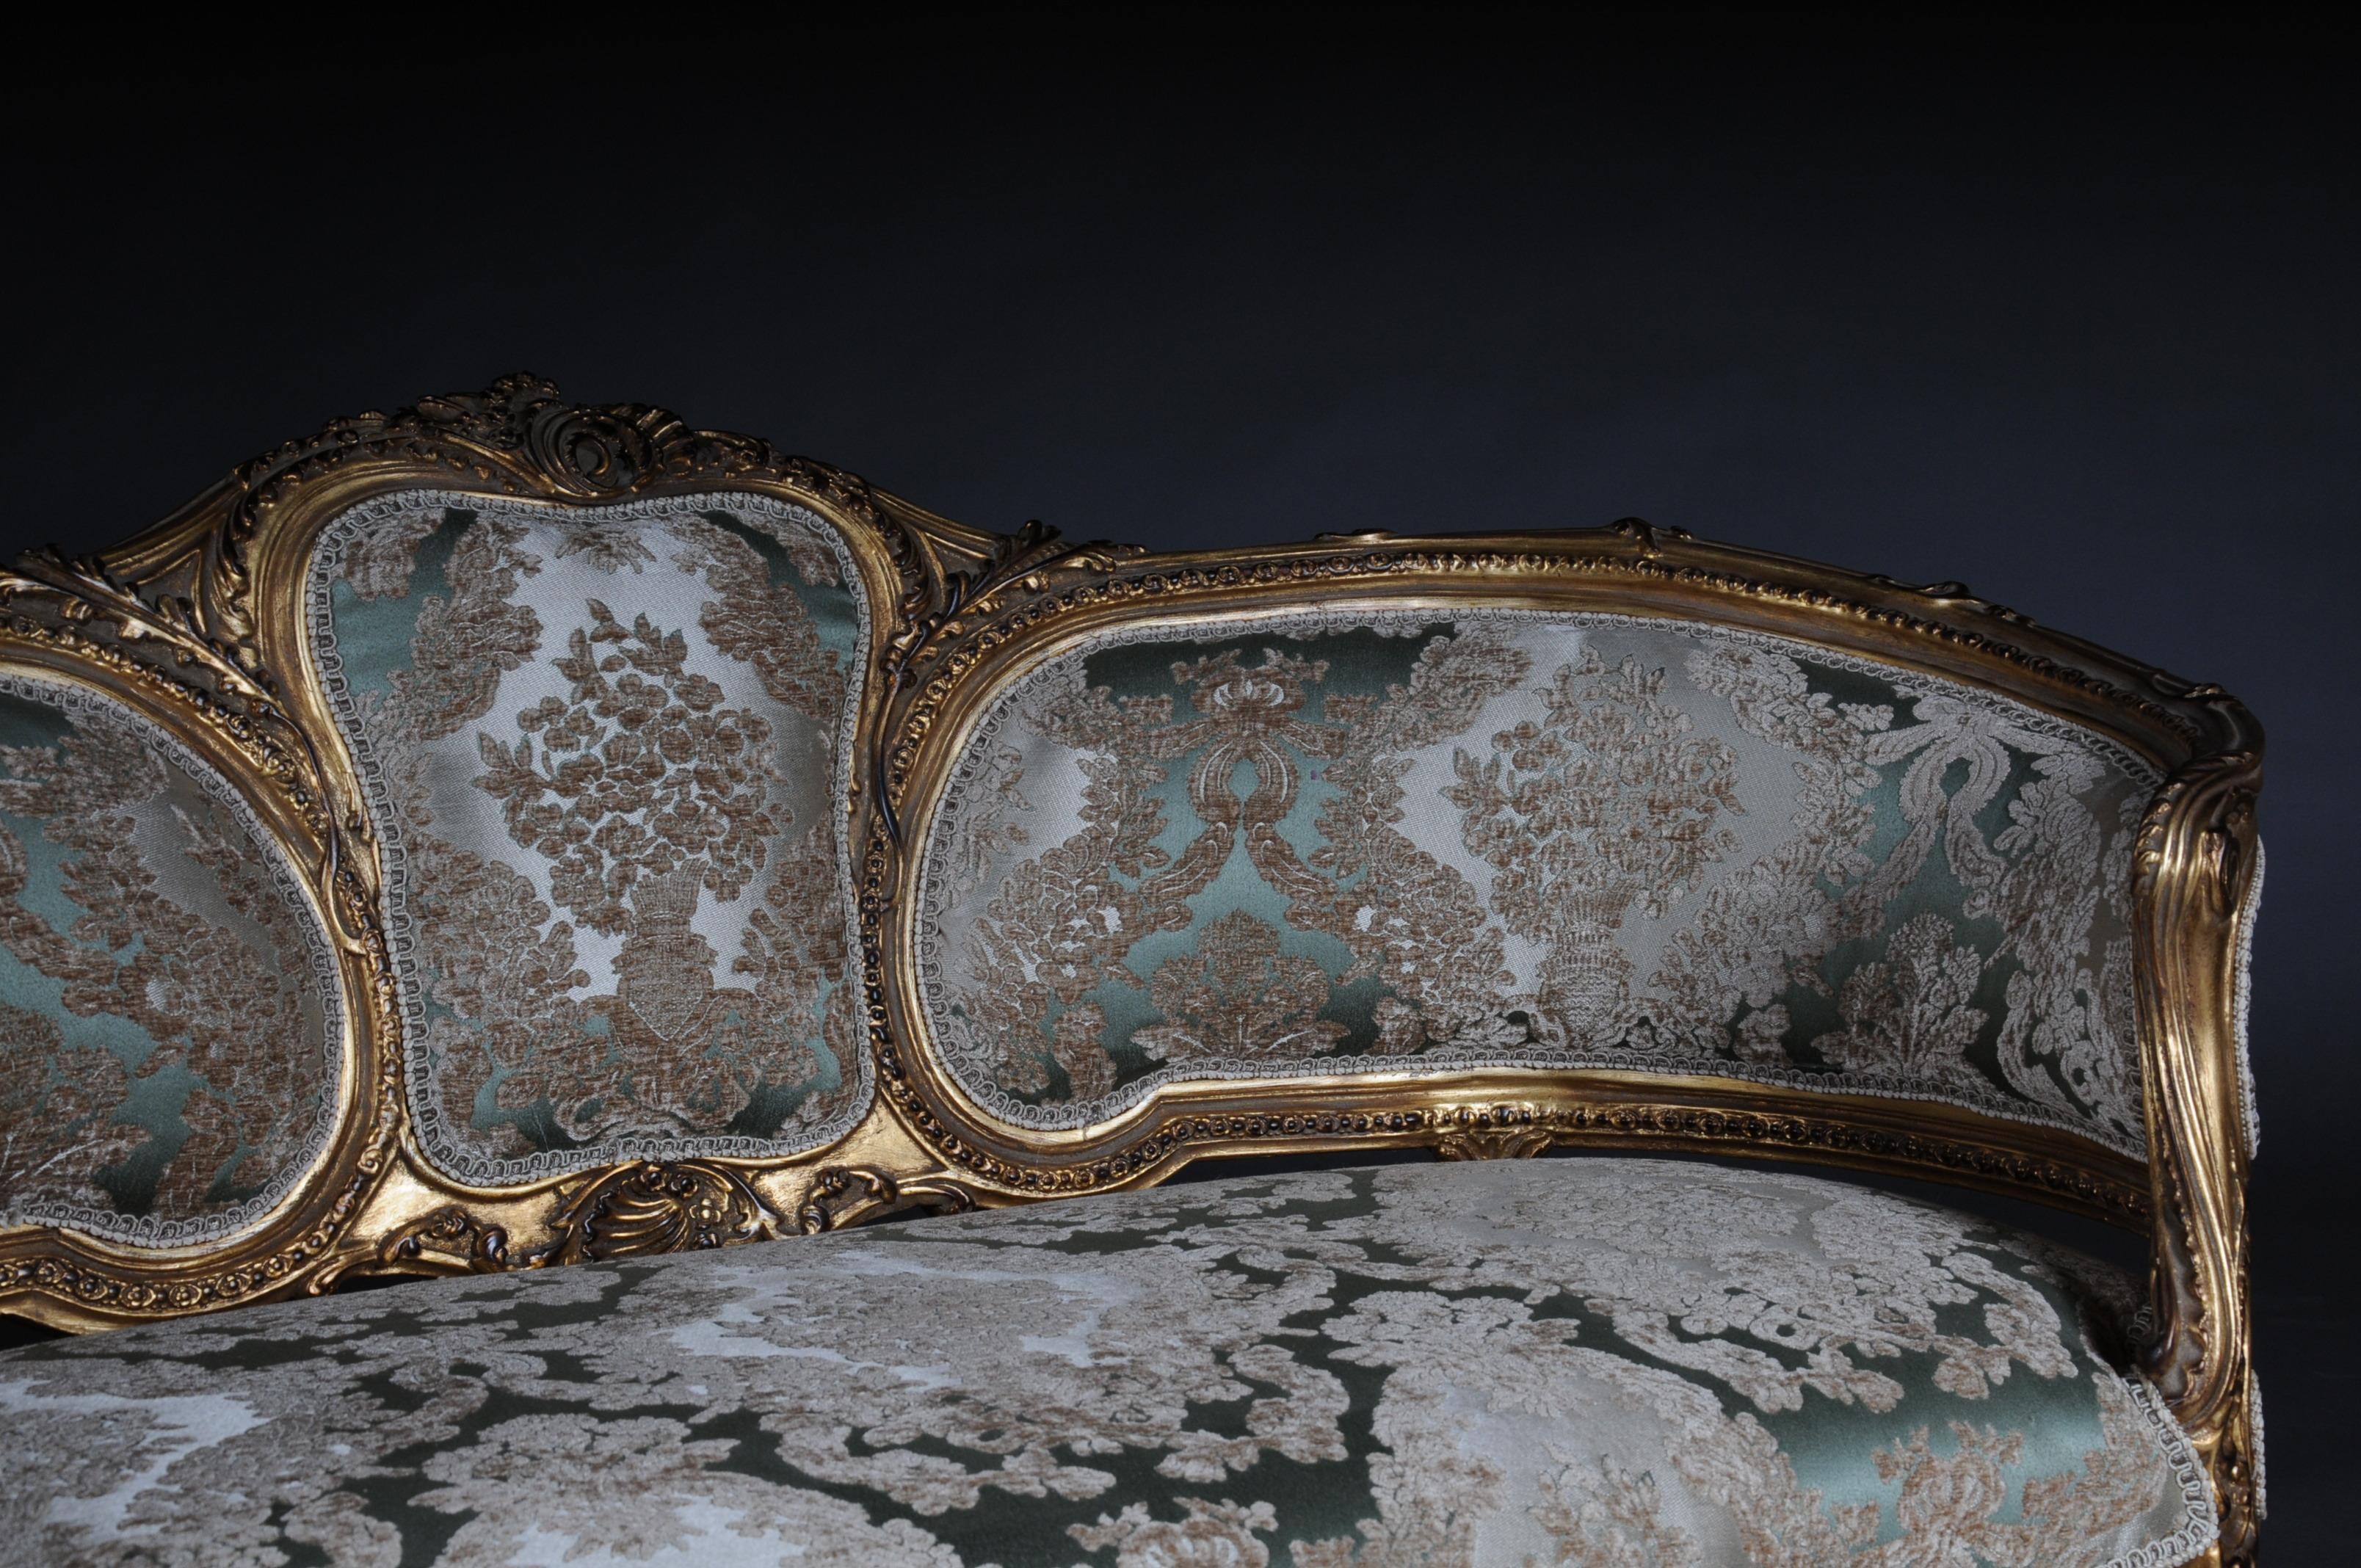 Hand-Carved Elegant Sofa, Couch, Canapé in Rococo or Louis XV Style